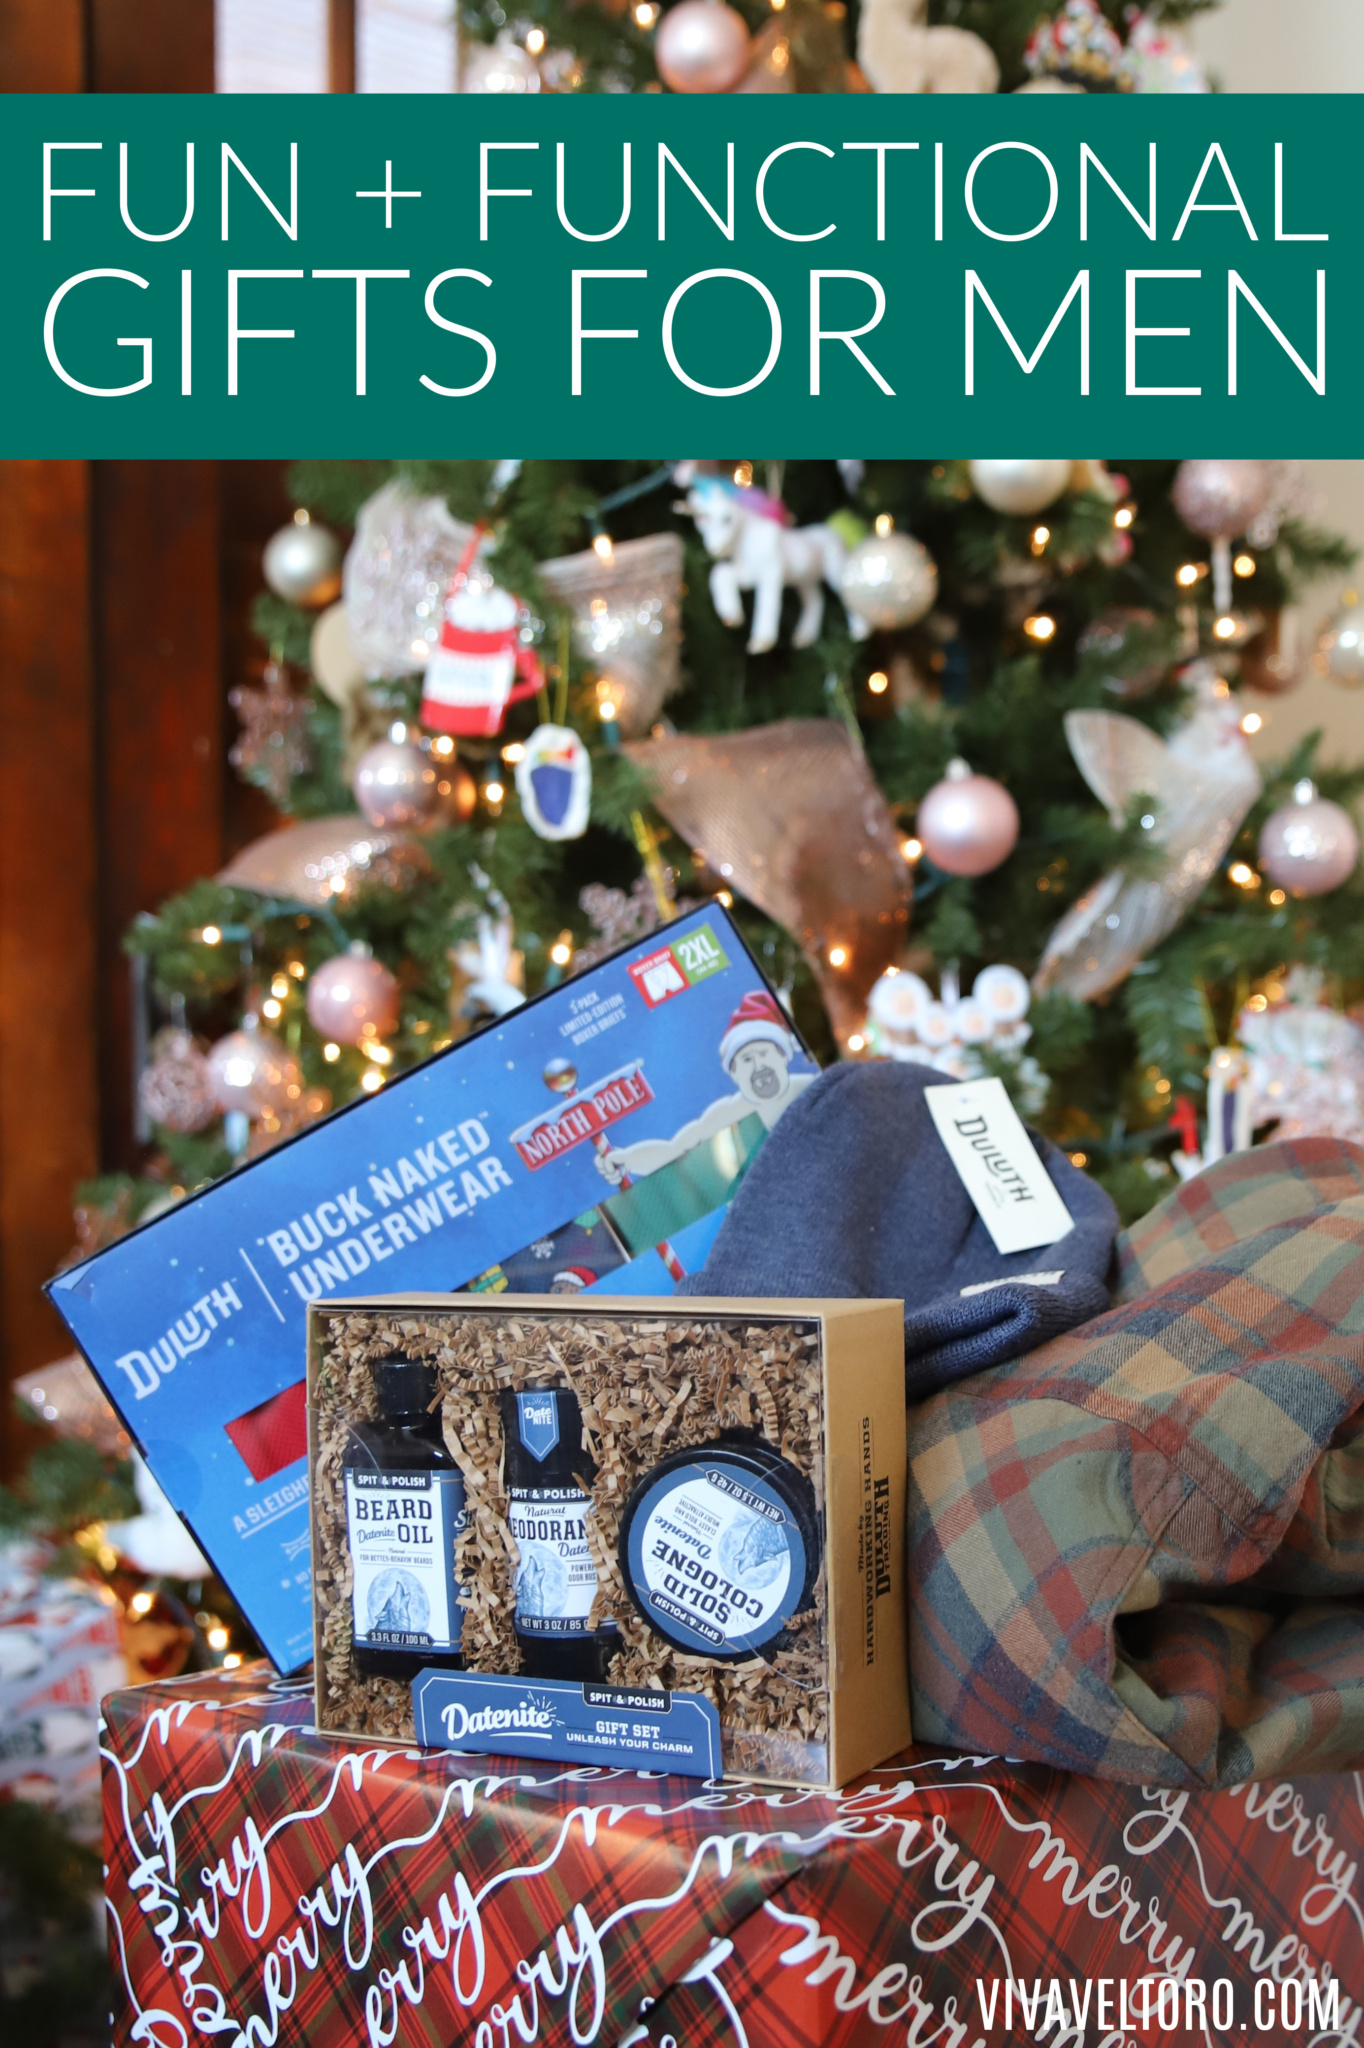 Fun + Functional Gifts for Men from Duluth Trading Company - Viva